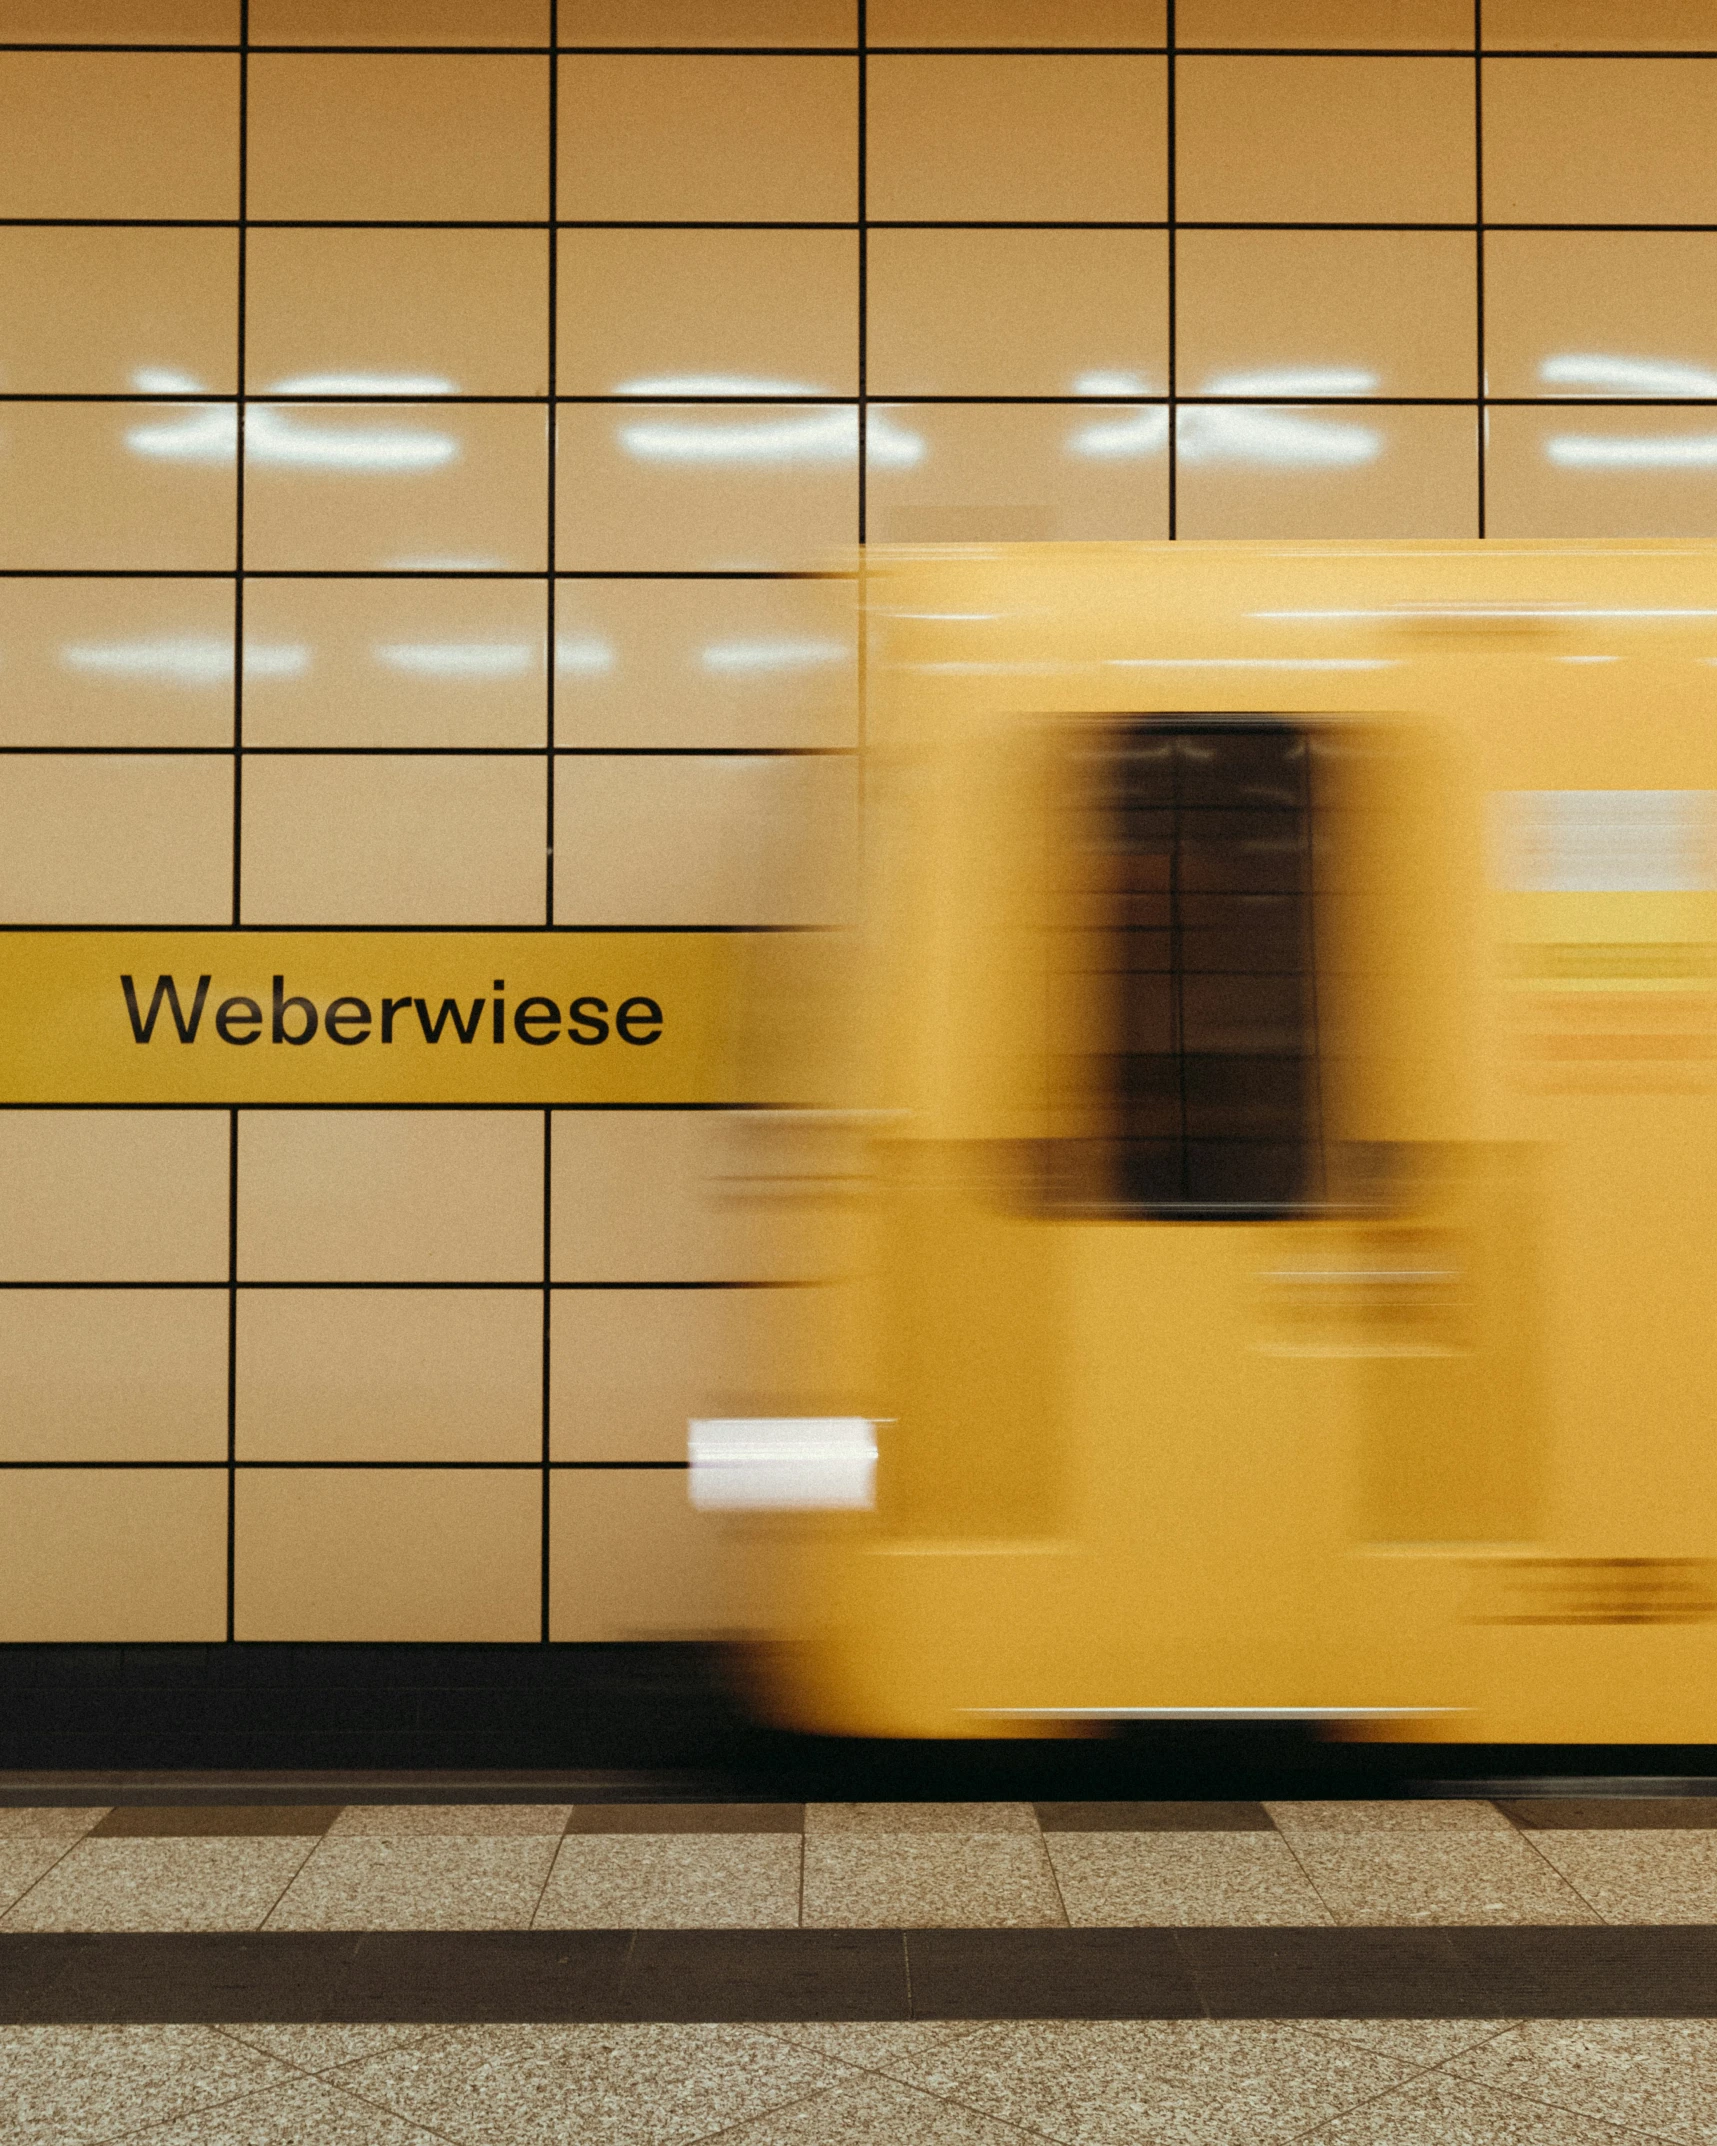 a blurry image of an advertit for we bewerise